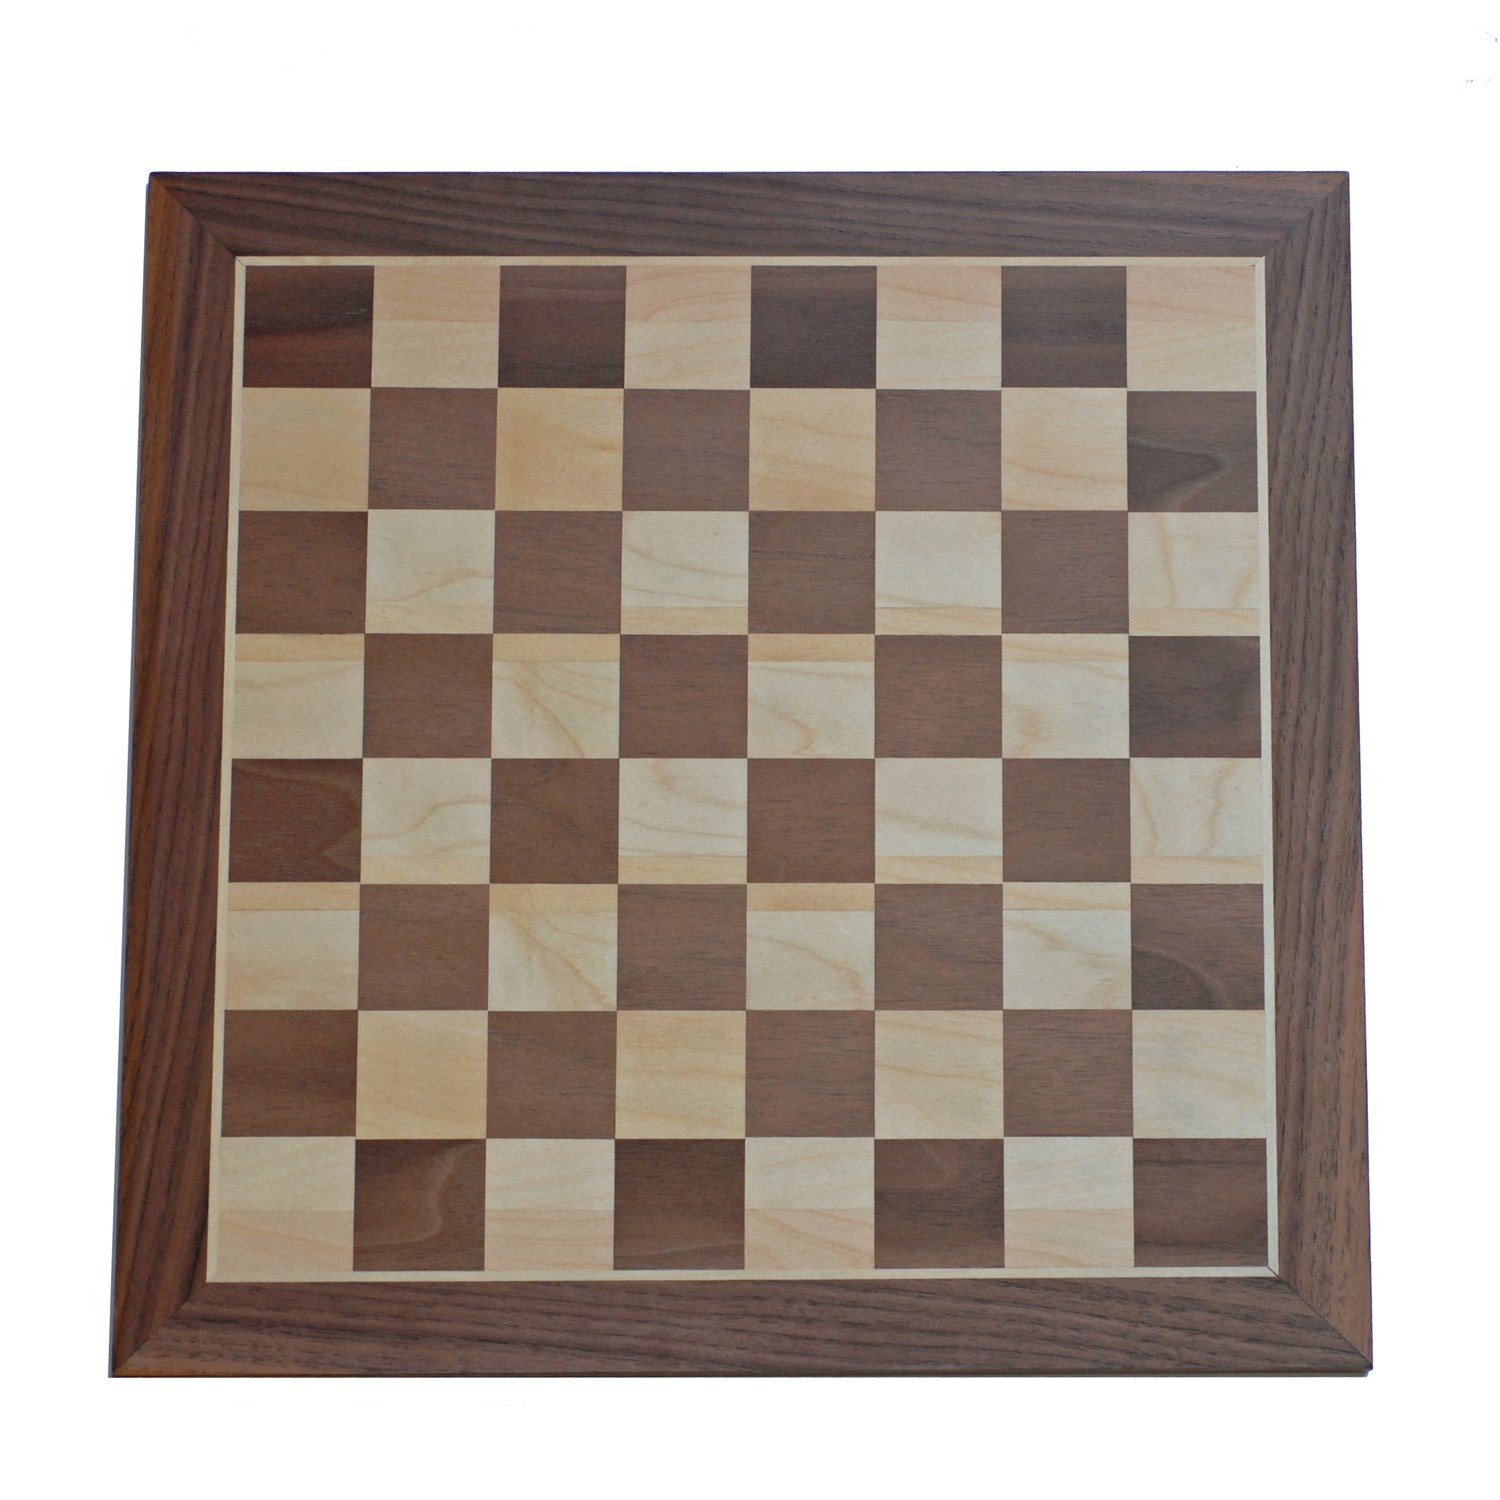 French Staunton Chess Set – Weighted Pieces & Walnut Wood Board 19 